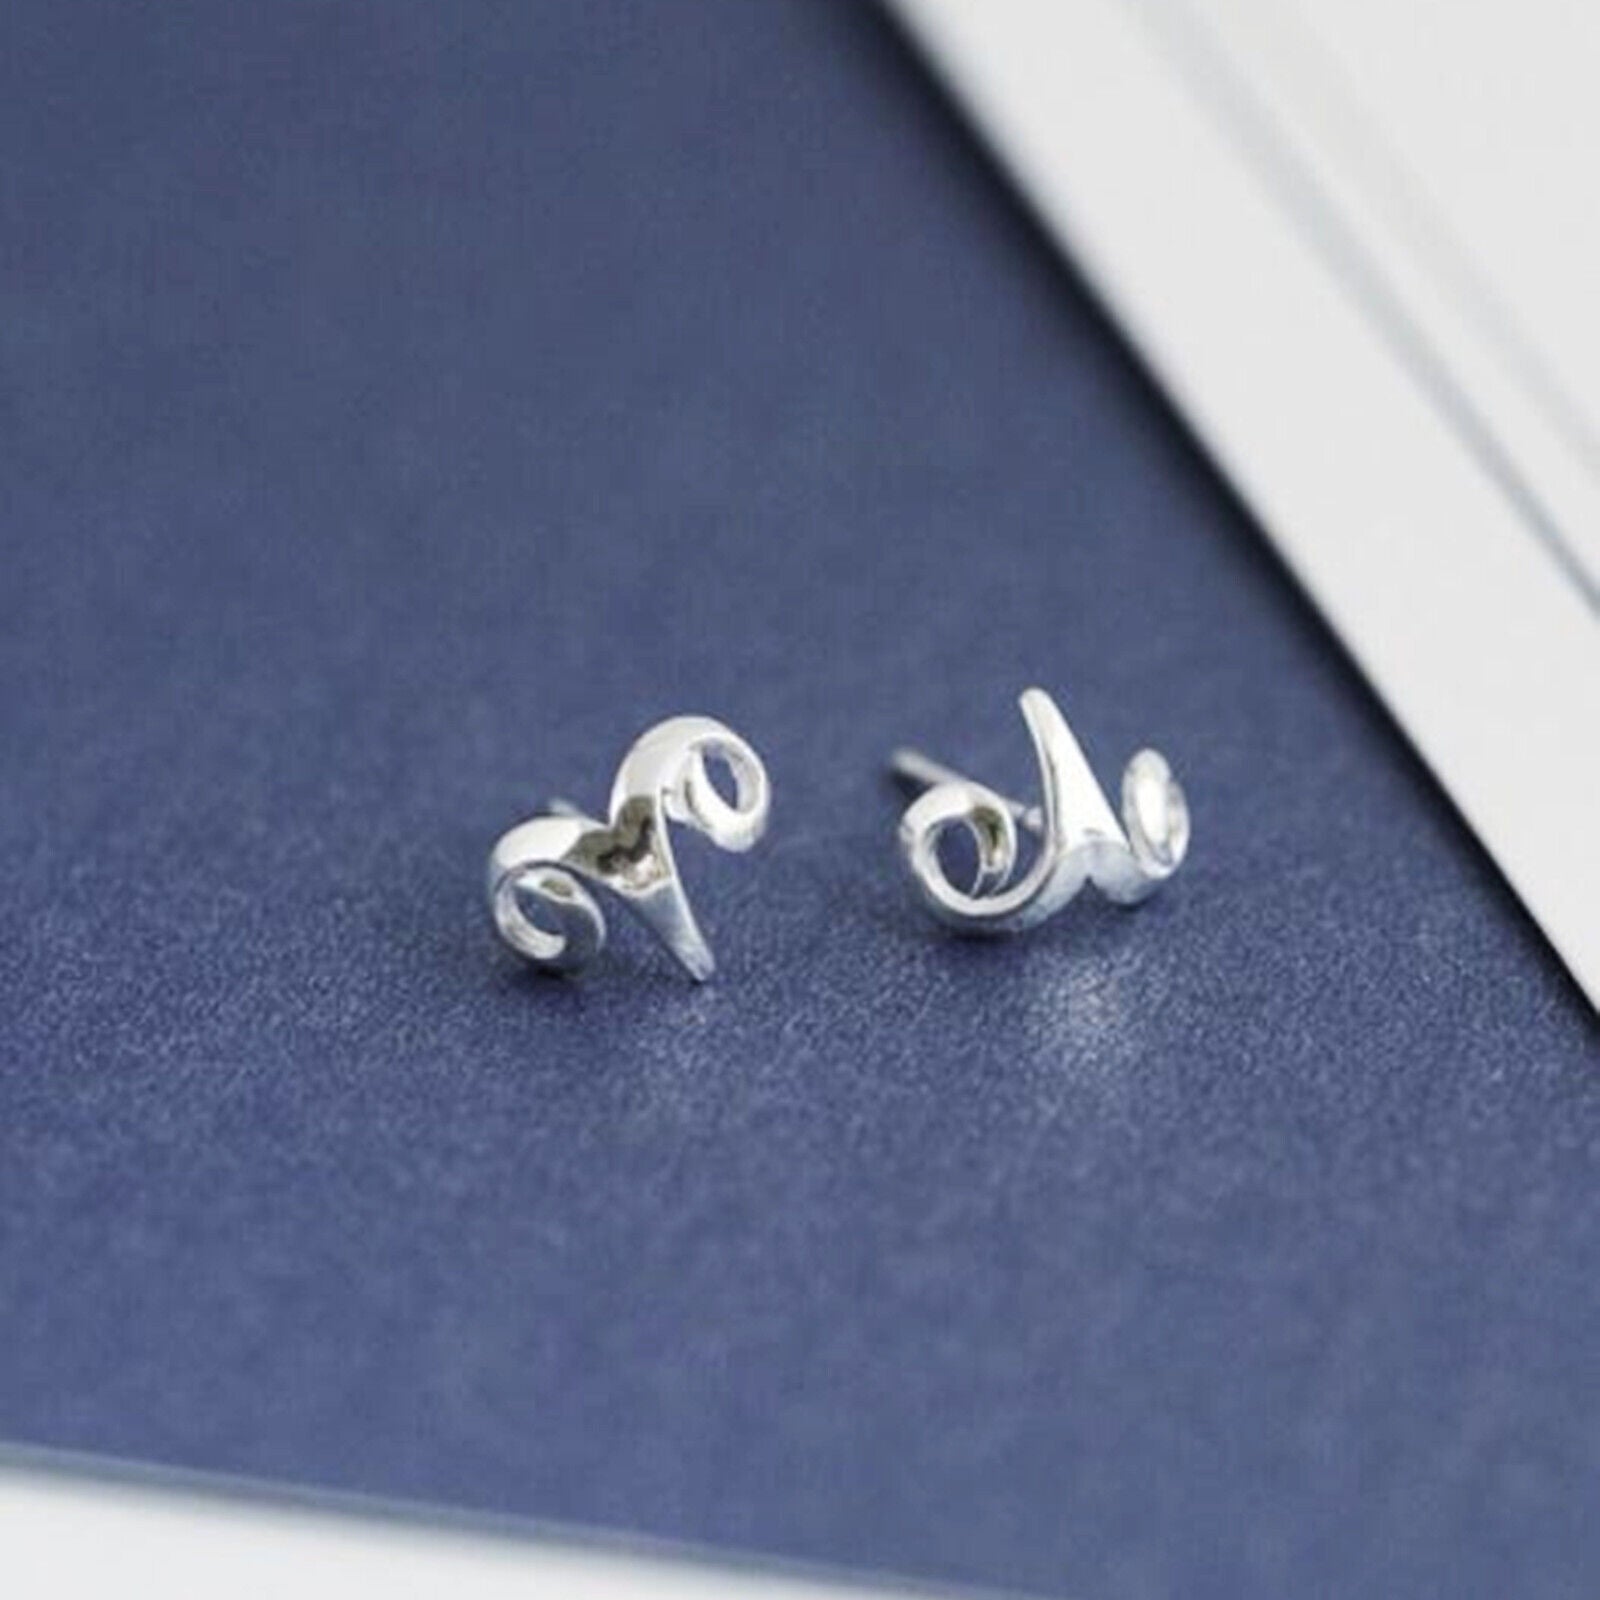 925 Sterling Silver Constellation Aries Sheep Stud Earrings with Shiny Finish - sugarkittenlondon